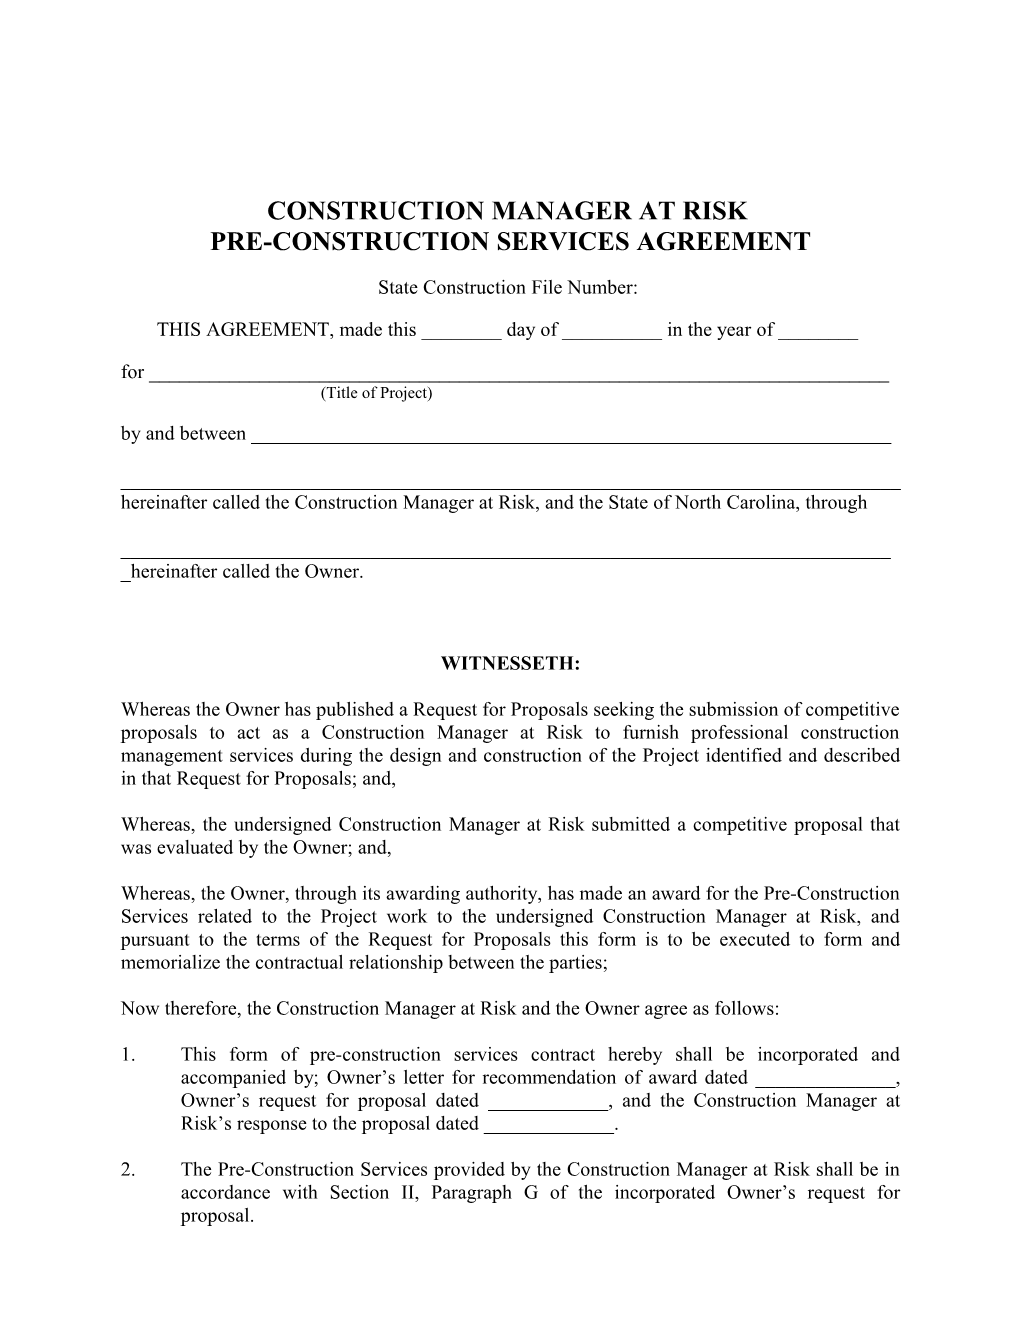 Form of Construction Manager Contract